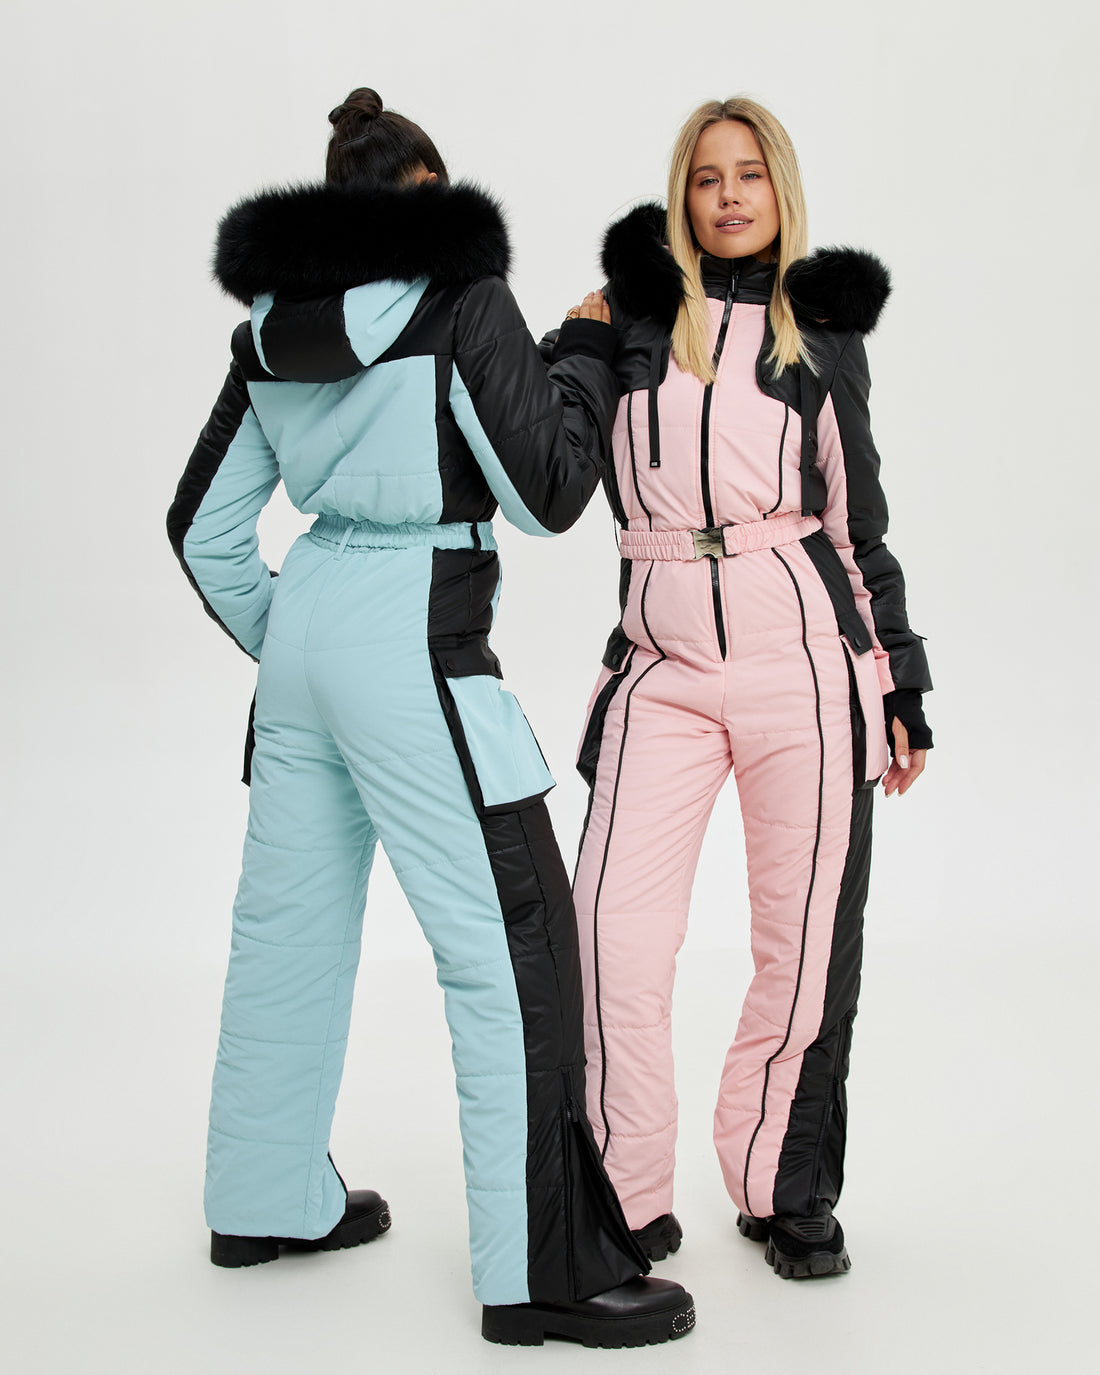 Blush pink ski suits for women one piece ETNA - Pink one piece - Warm snowsuit women outfit